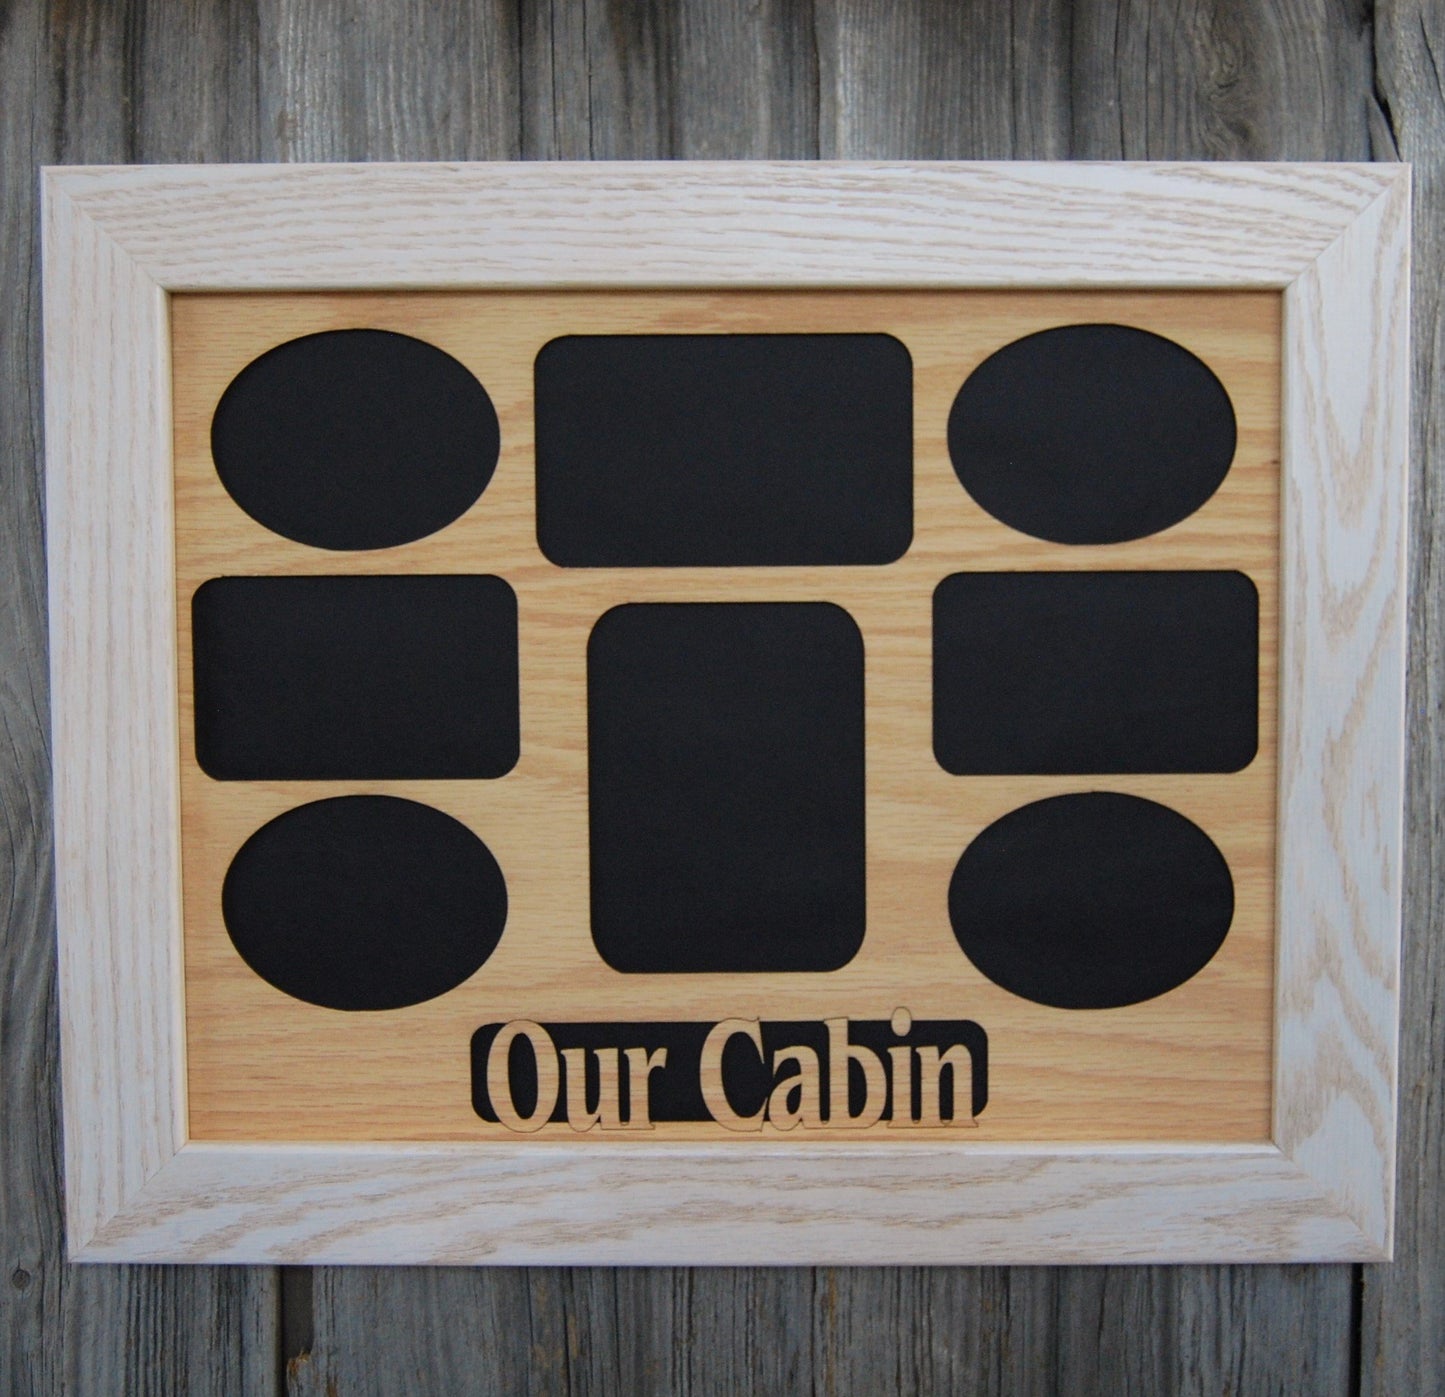 Our Cabin Picture Frame 11"x14"